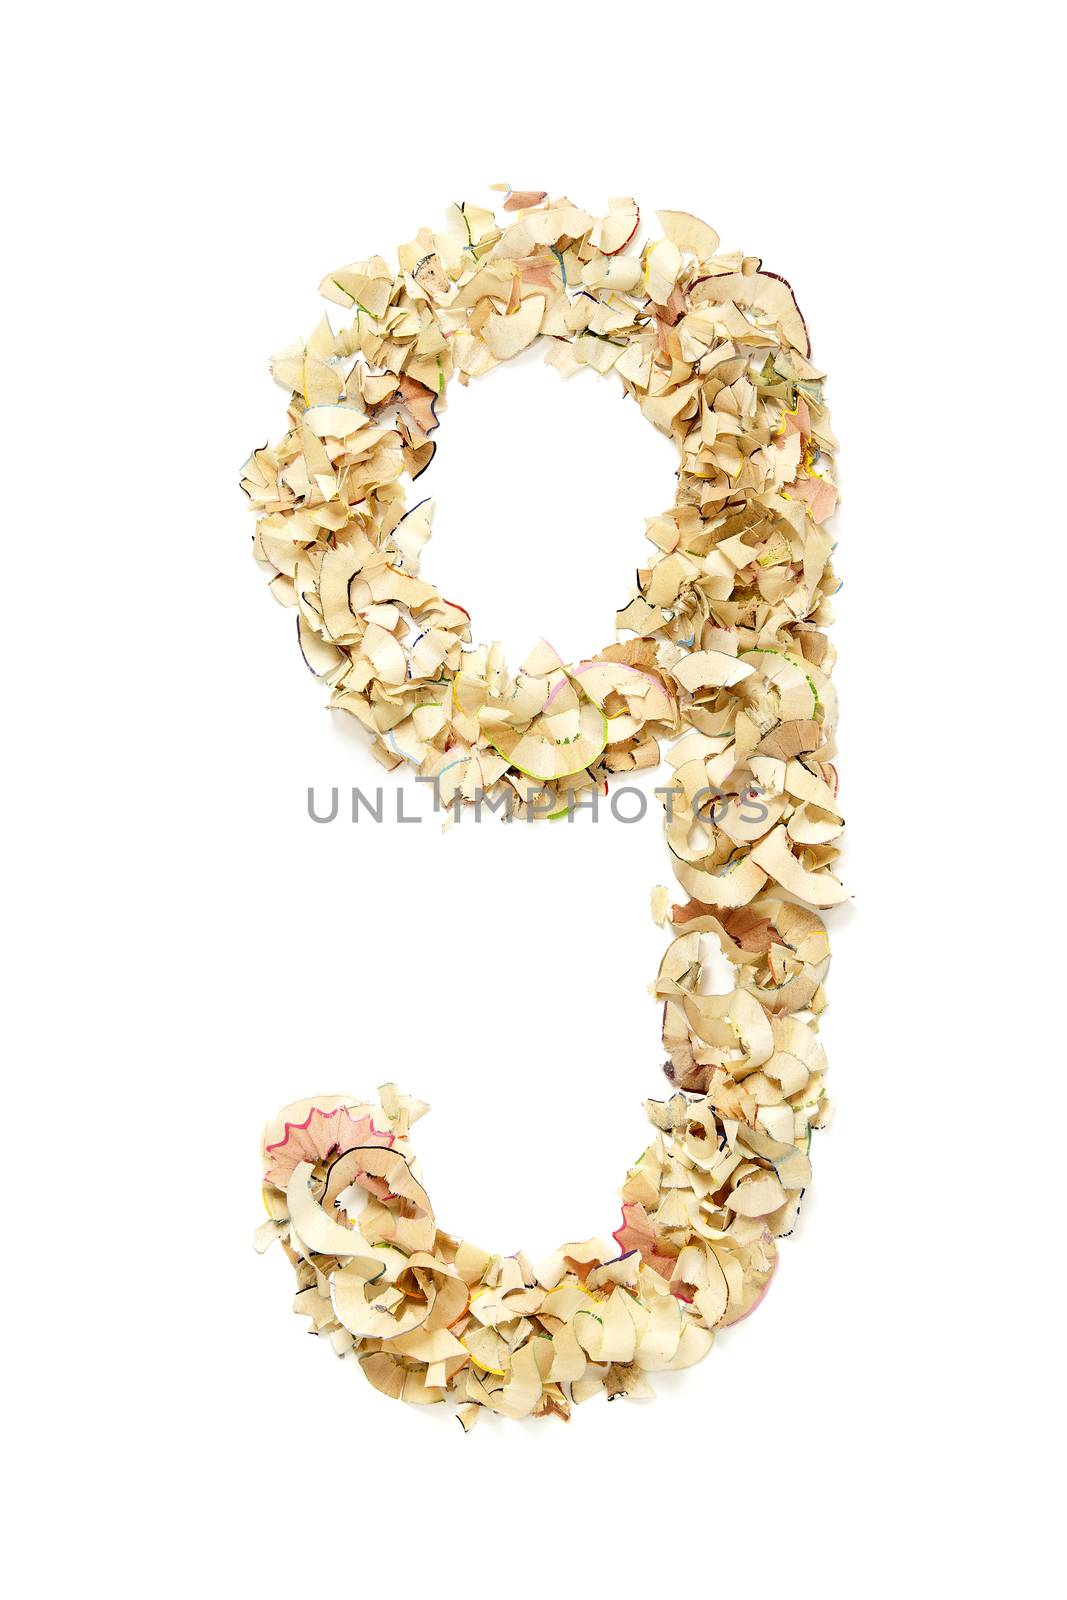 Number 9 made of pencil shavings by filipw